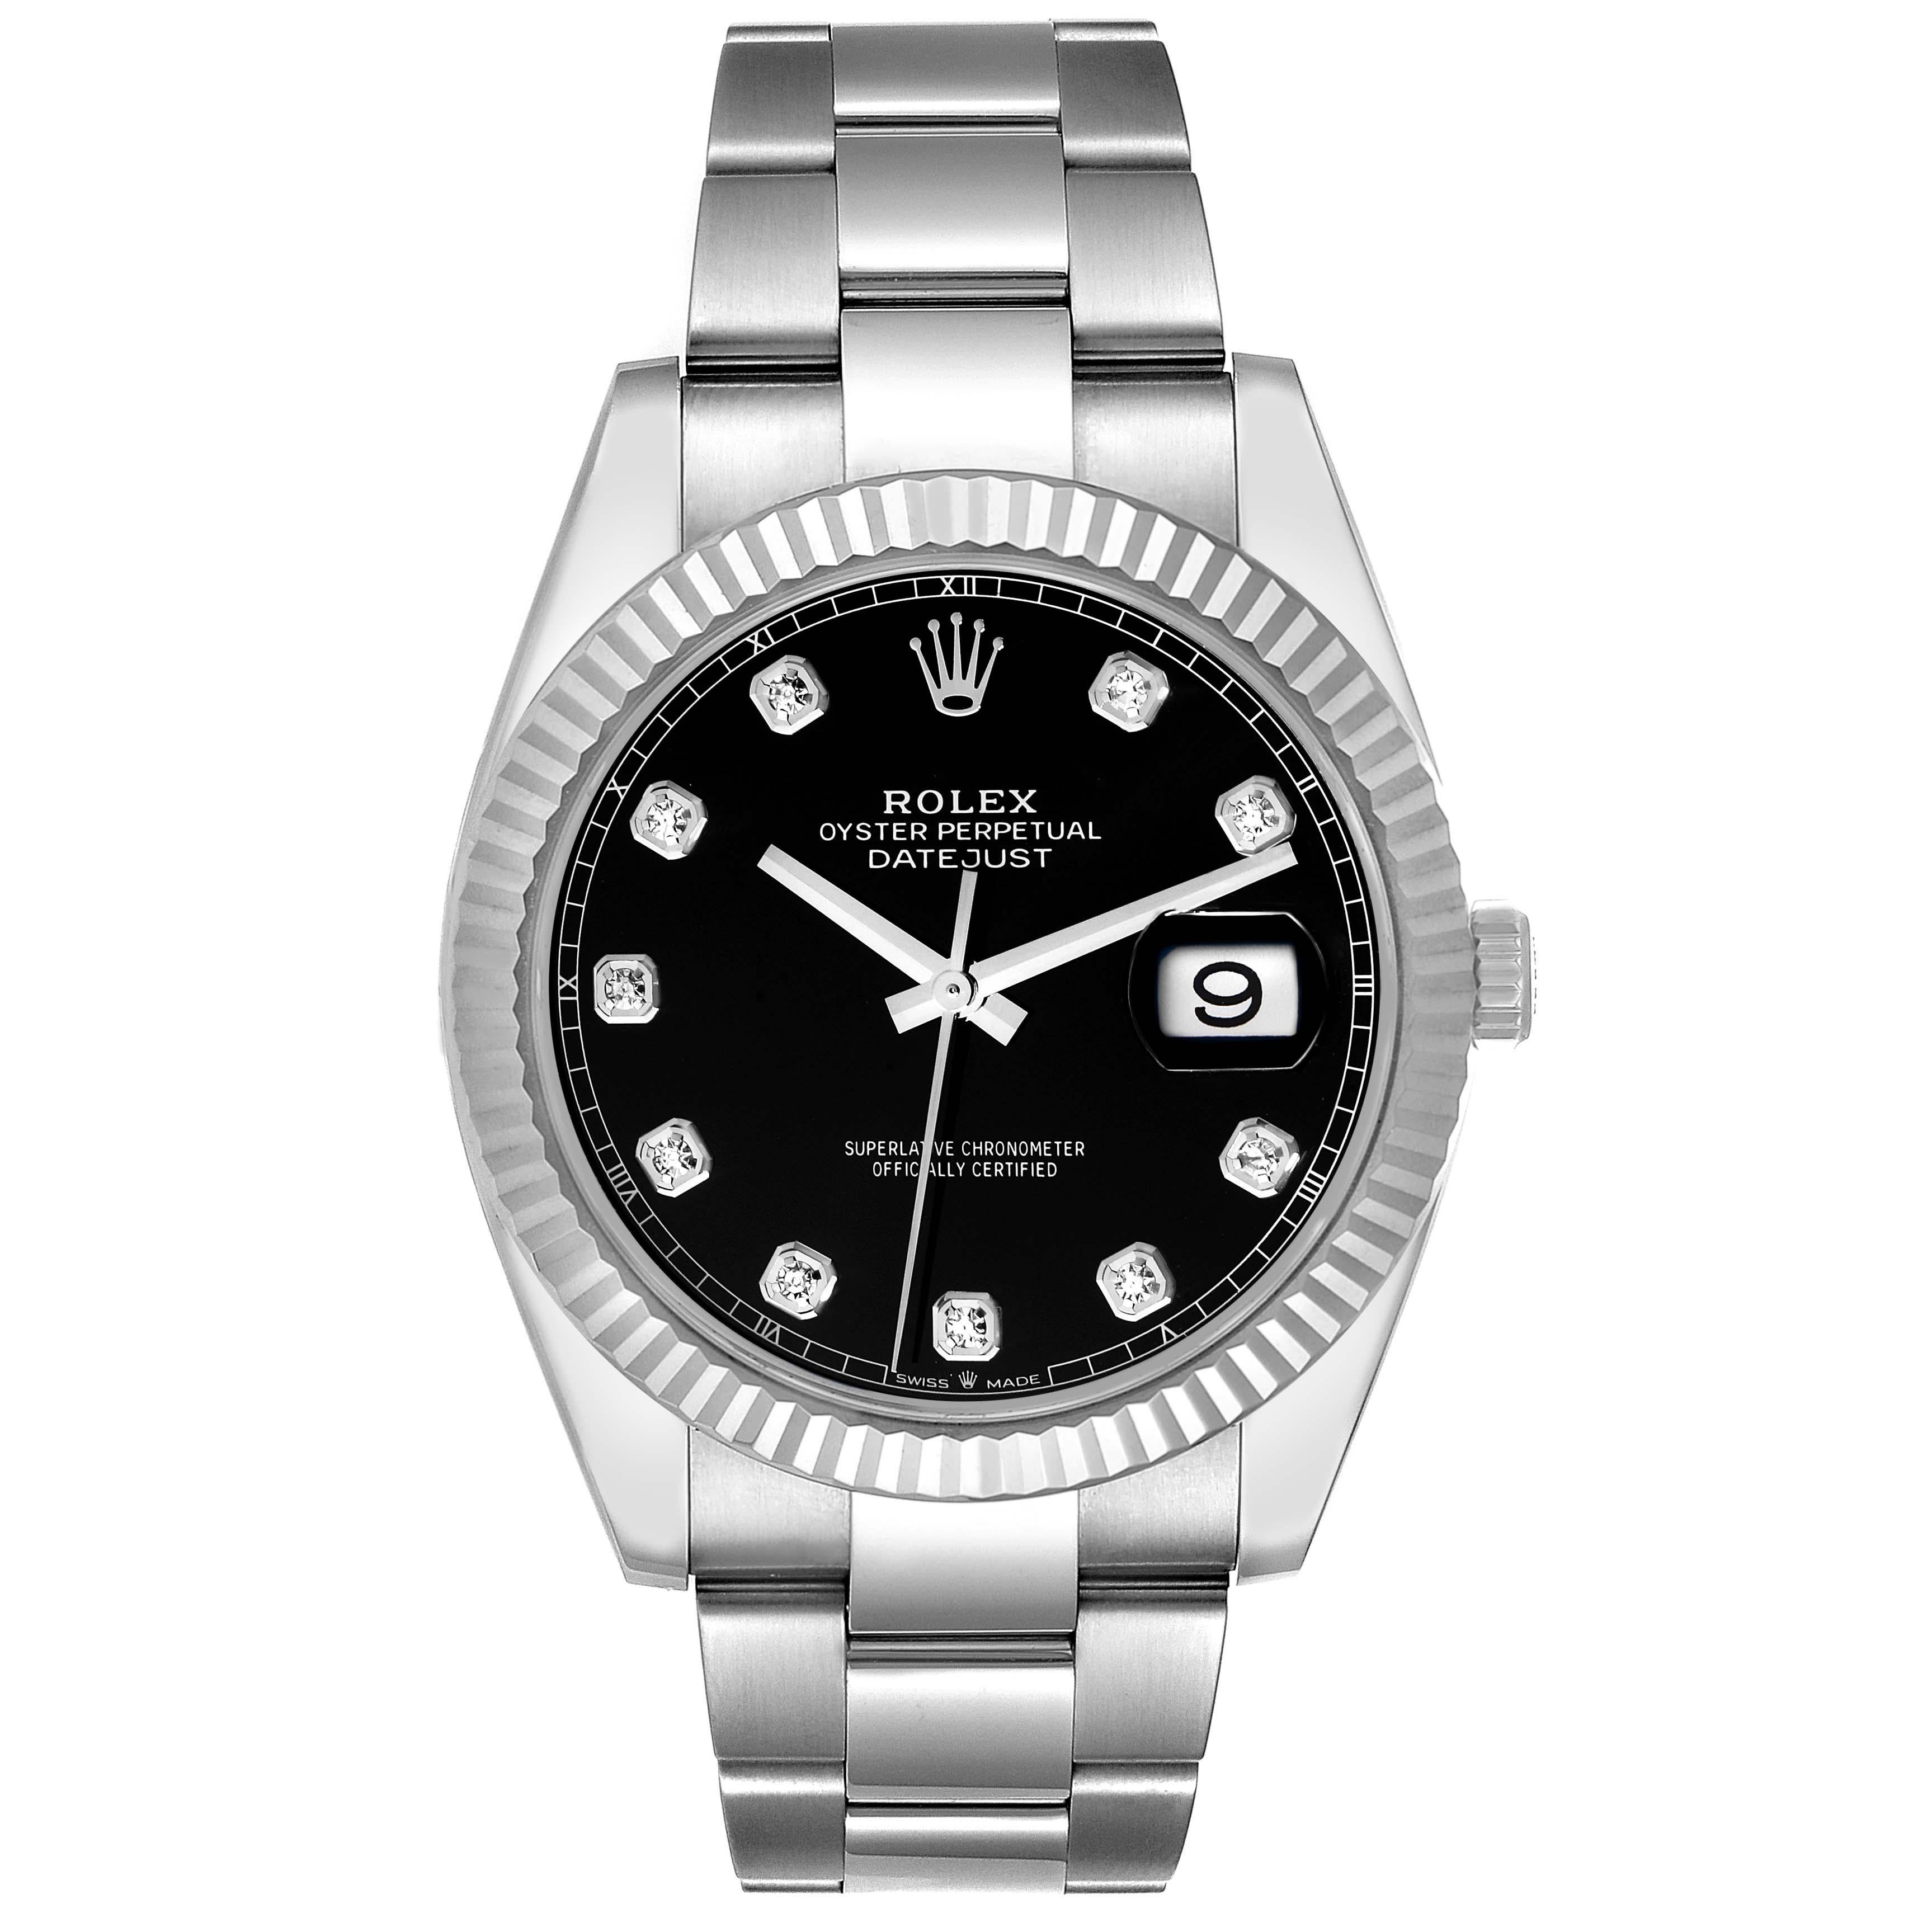 Rolex Datejust 41 Steel White Gold Diamond Dial Mens Watch 126334 Box Card. Officially certified chronometer automatic self-winding movement. Stainless steel case 41 mm in diameter. Rolex logo on a crown. 18K white gold fluted bezel. Scratch